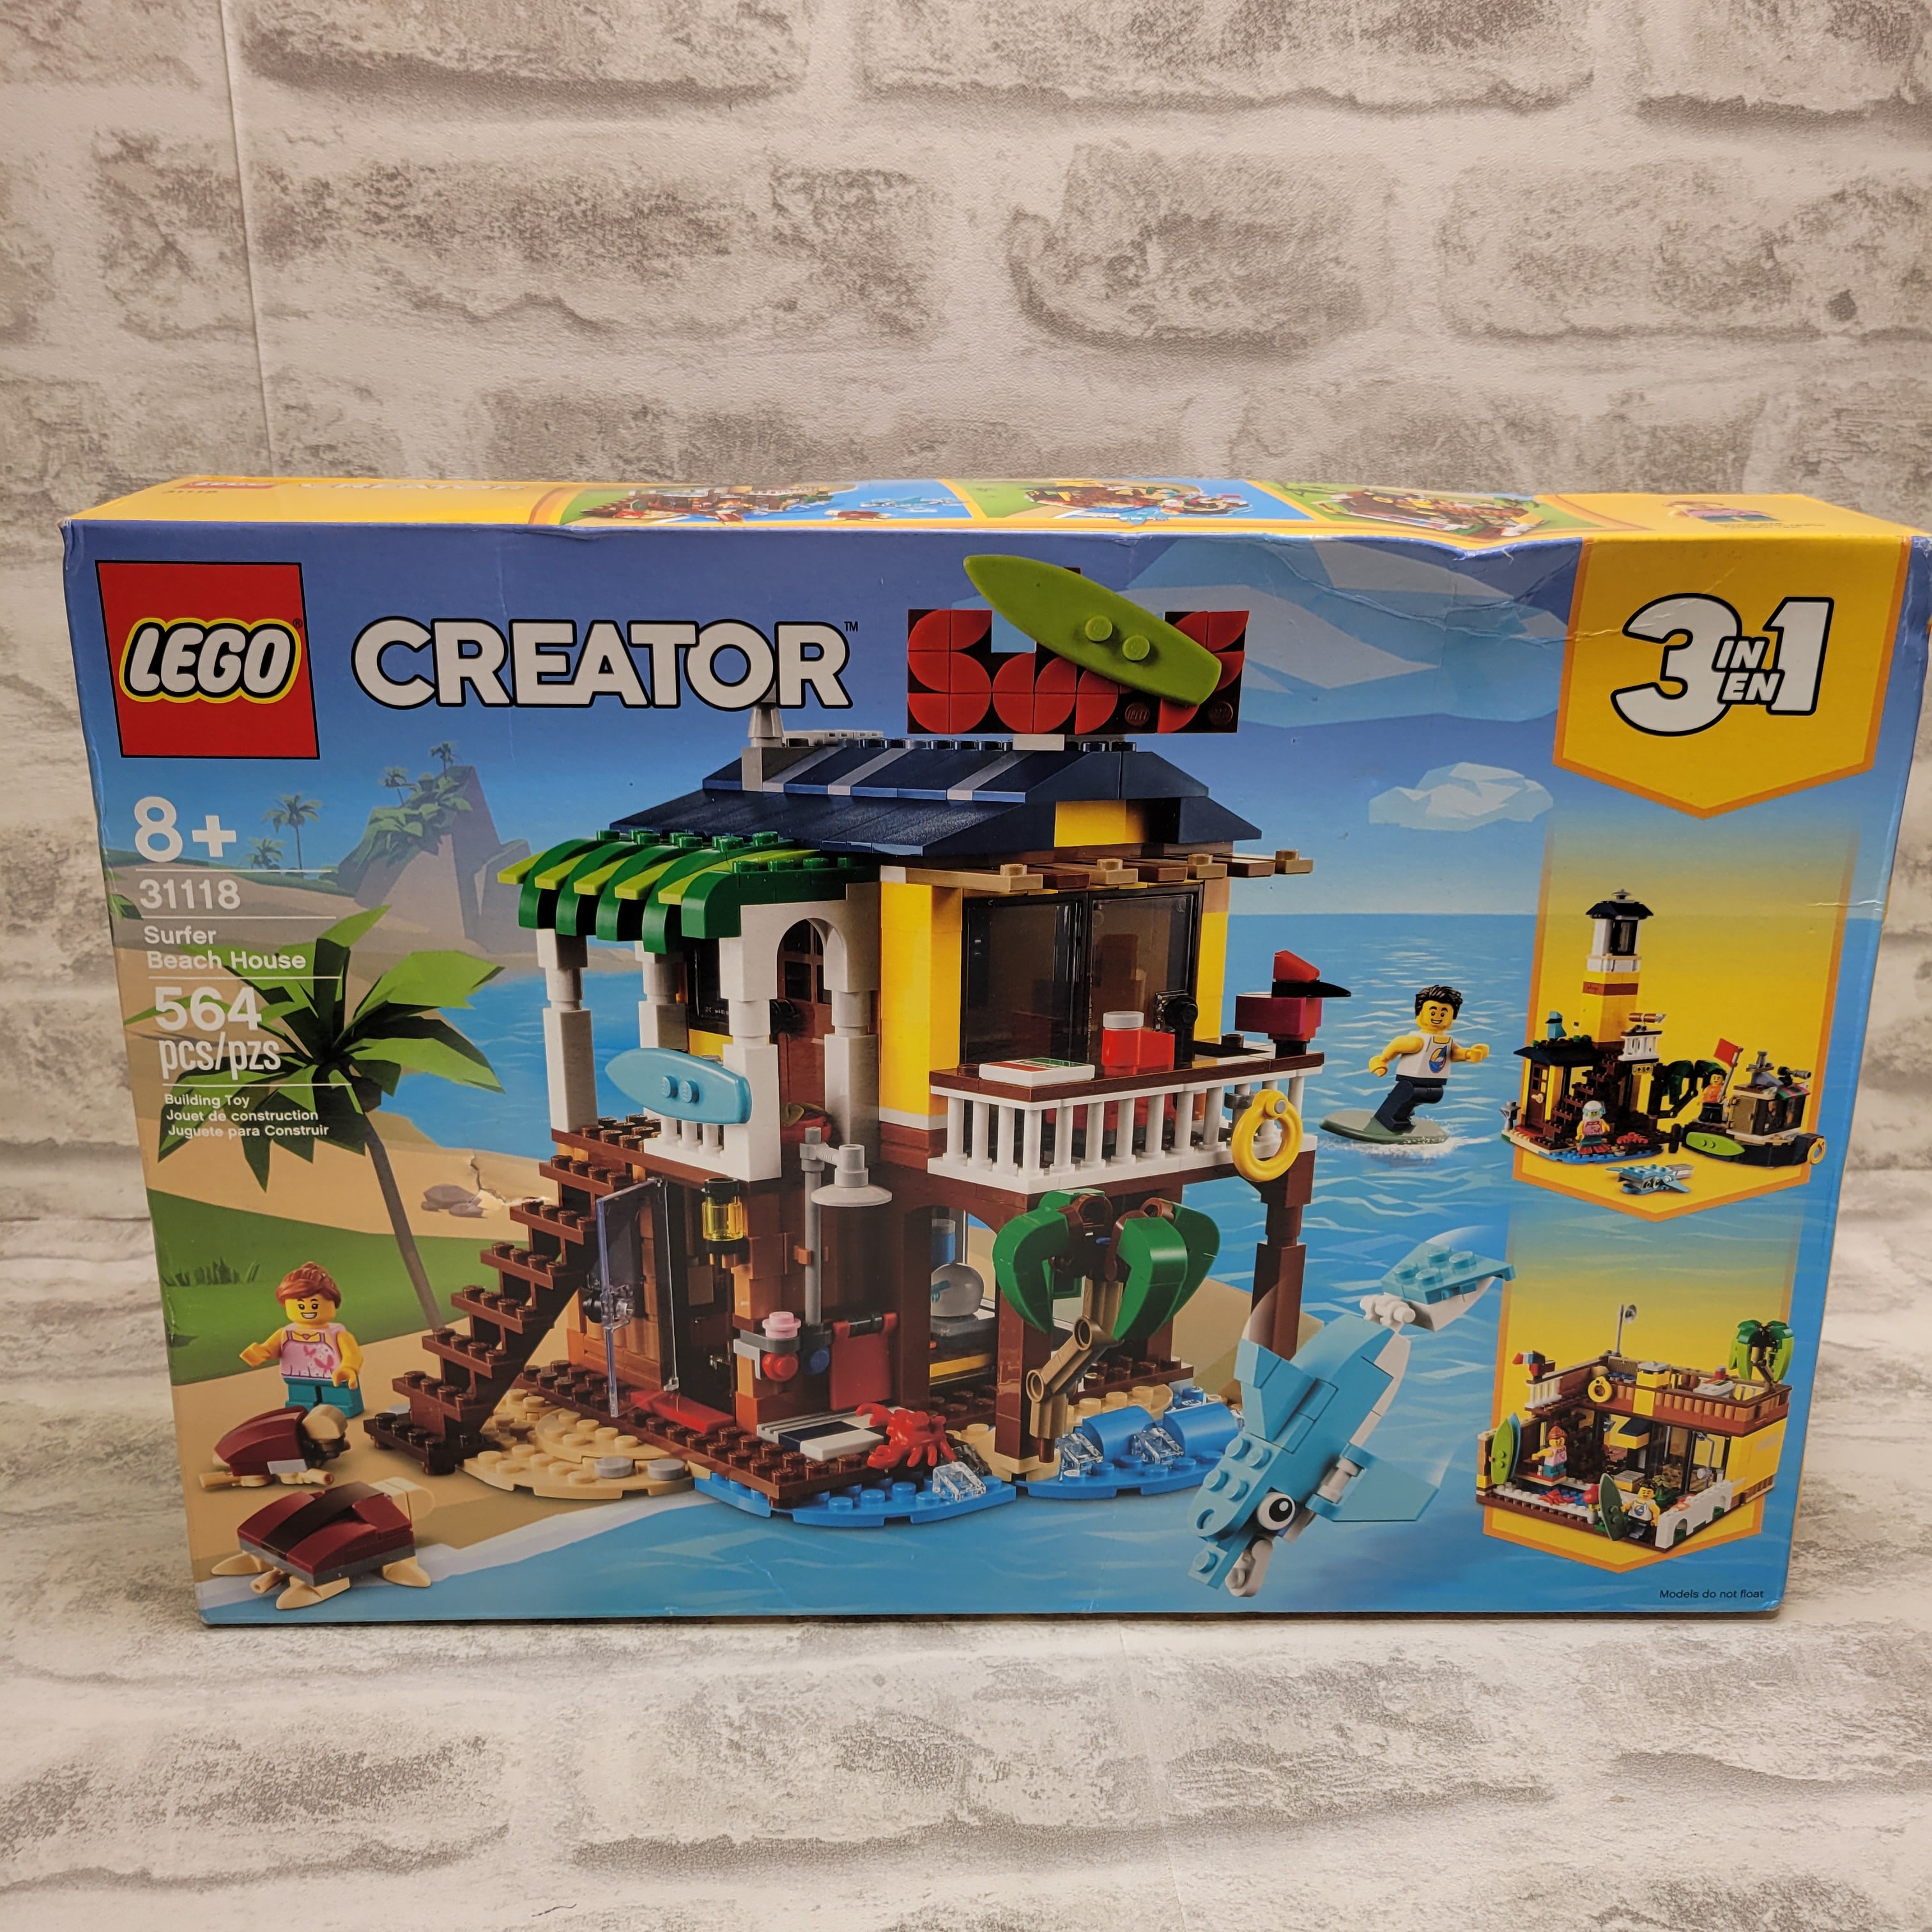 LEGO Creator 3in1 Surfer Beach House 31118 Building Kit (564 Pieces) (7611666006254)